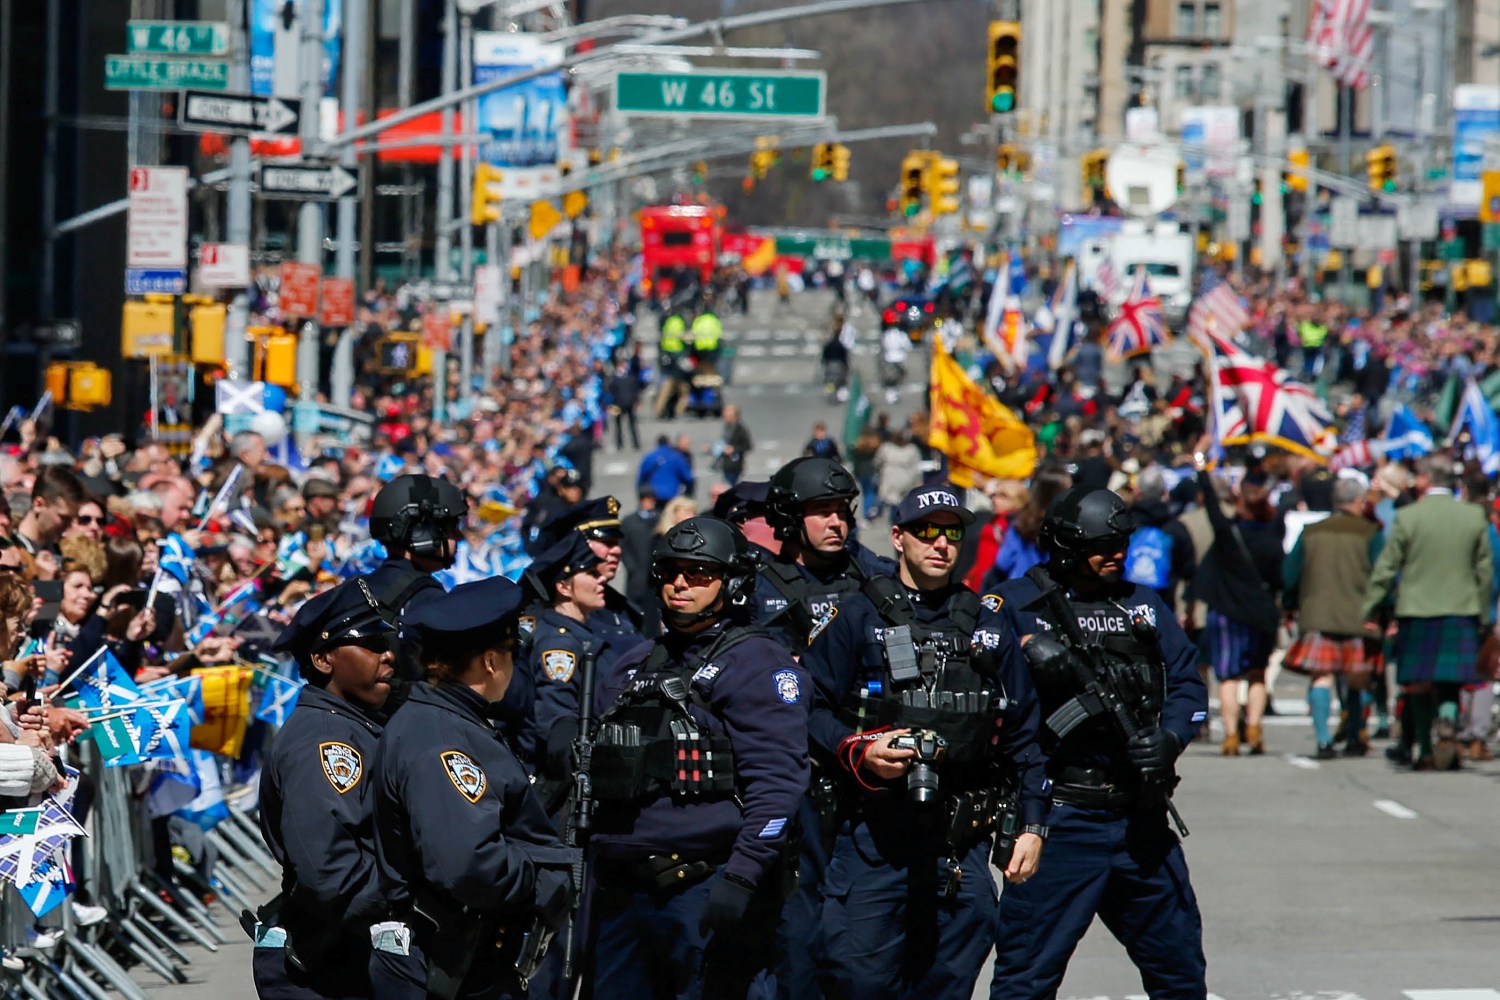 Members of the New York Police Department's Counterterrorism Bureau stand watch as people take part during the Annual Tartan Day Parade in New York, U.S. April 8, 2017. REUTERS/Eduardo Munoz - RC1447601E80